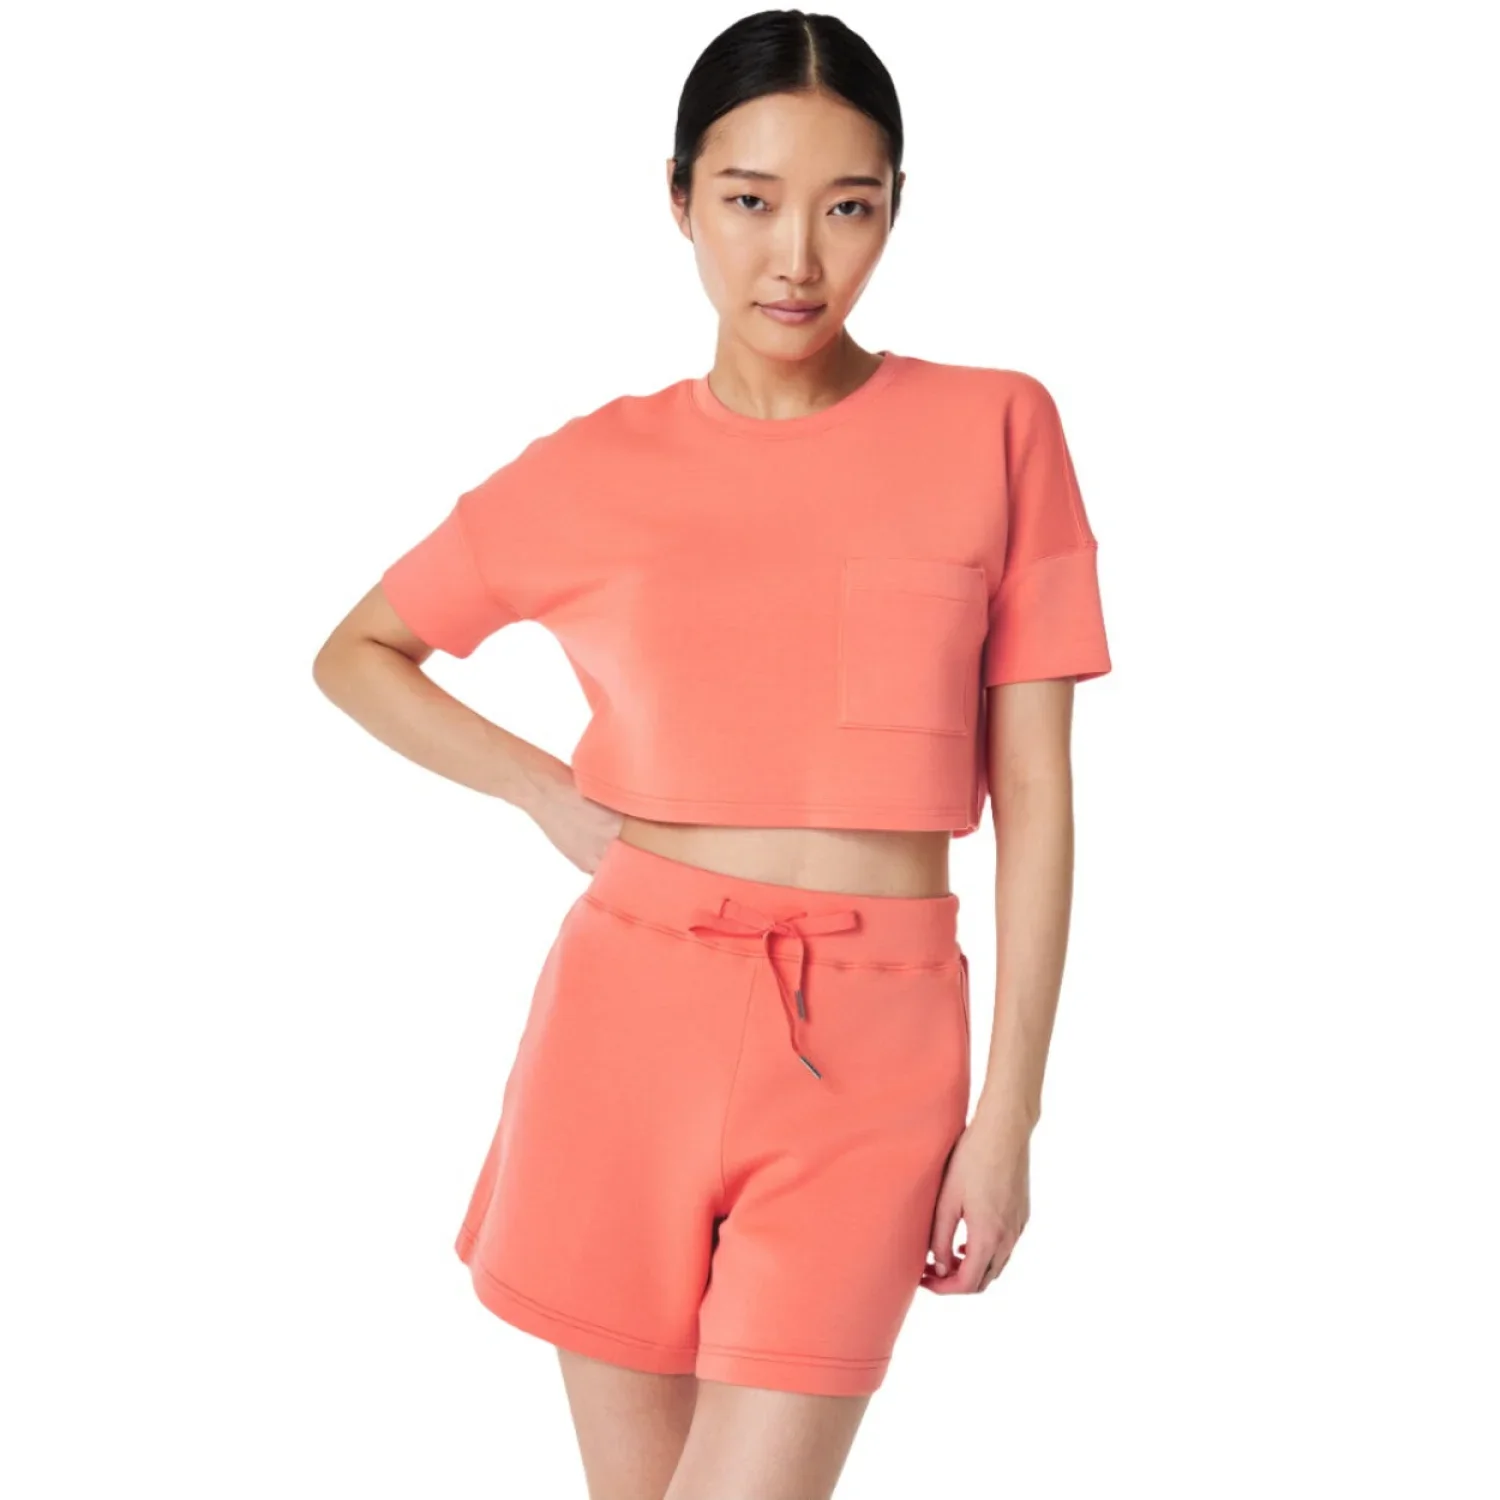 SPANX 02. WOMENS APPAREL - WOMENS SS SHIRTS - WOMENS SS CASUAL Women's AirEssentials Cropped Pocket Tee SUNSET PEACH